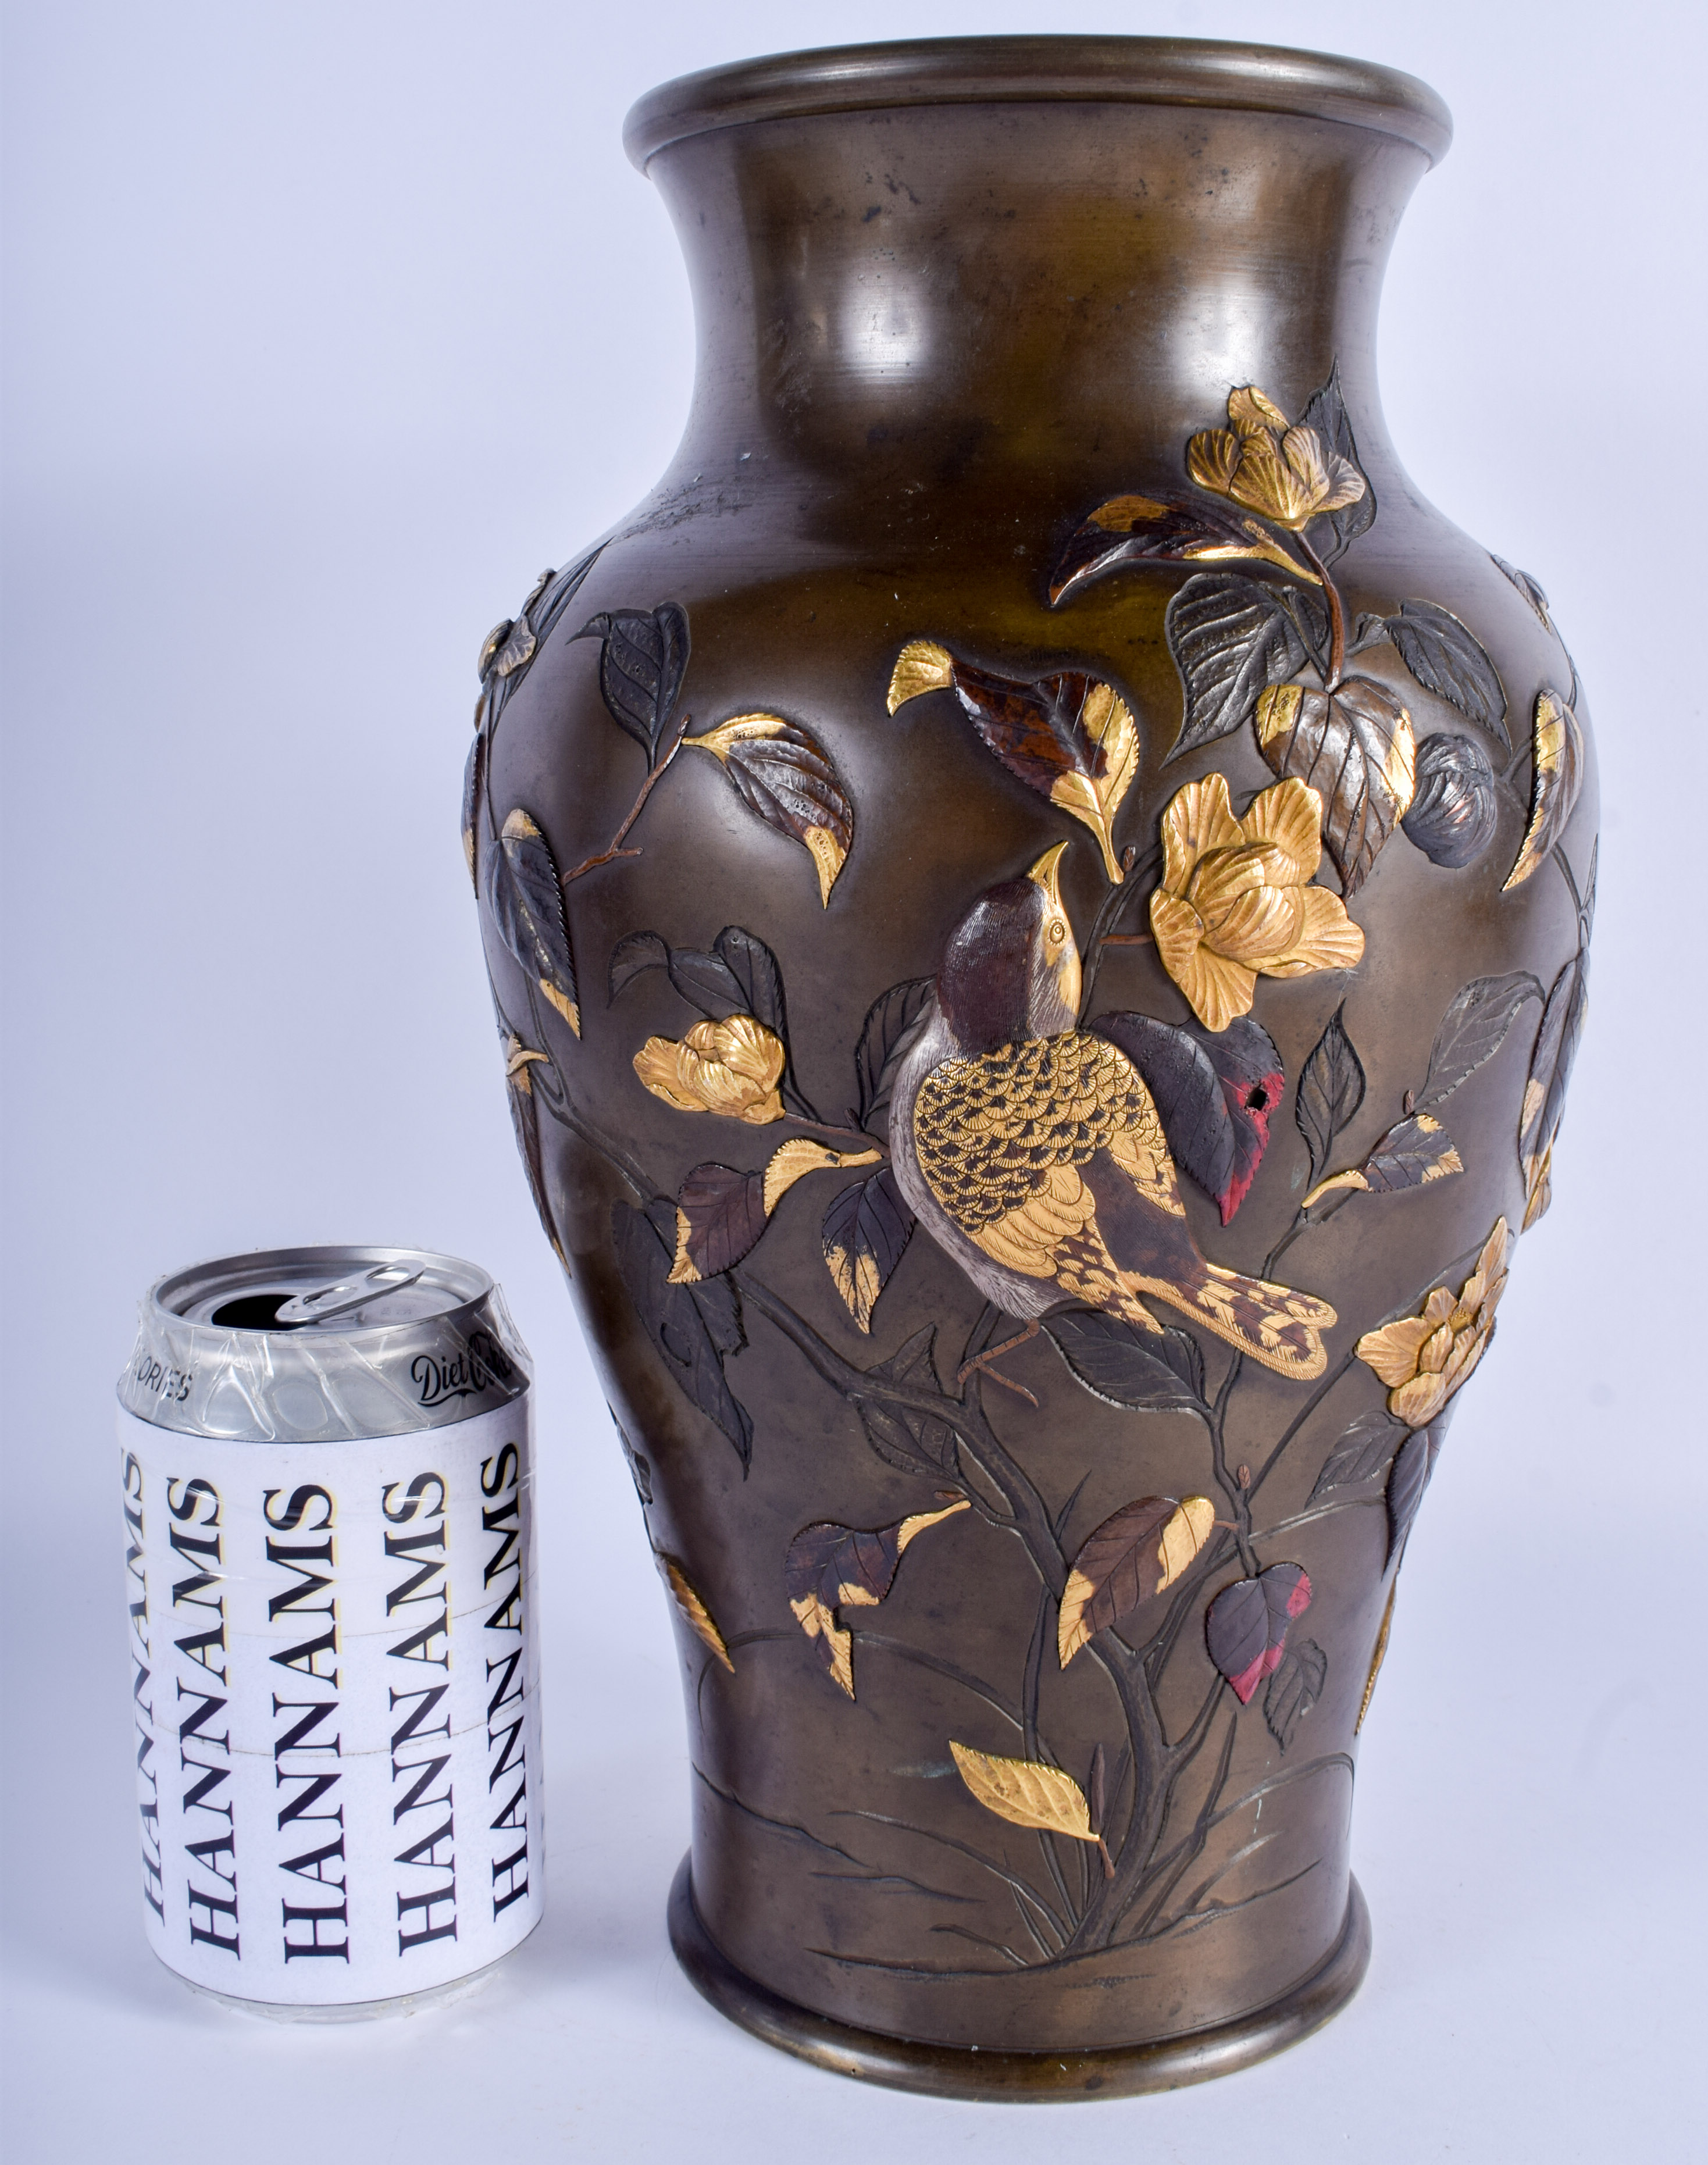 A 19TH CENTURY JAPANESE MEIJI PERIOD BRONZE GOLD ONLAID VASE decorated with birds amongst foliage. 3